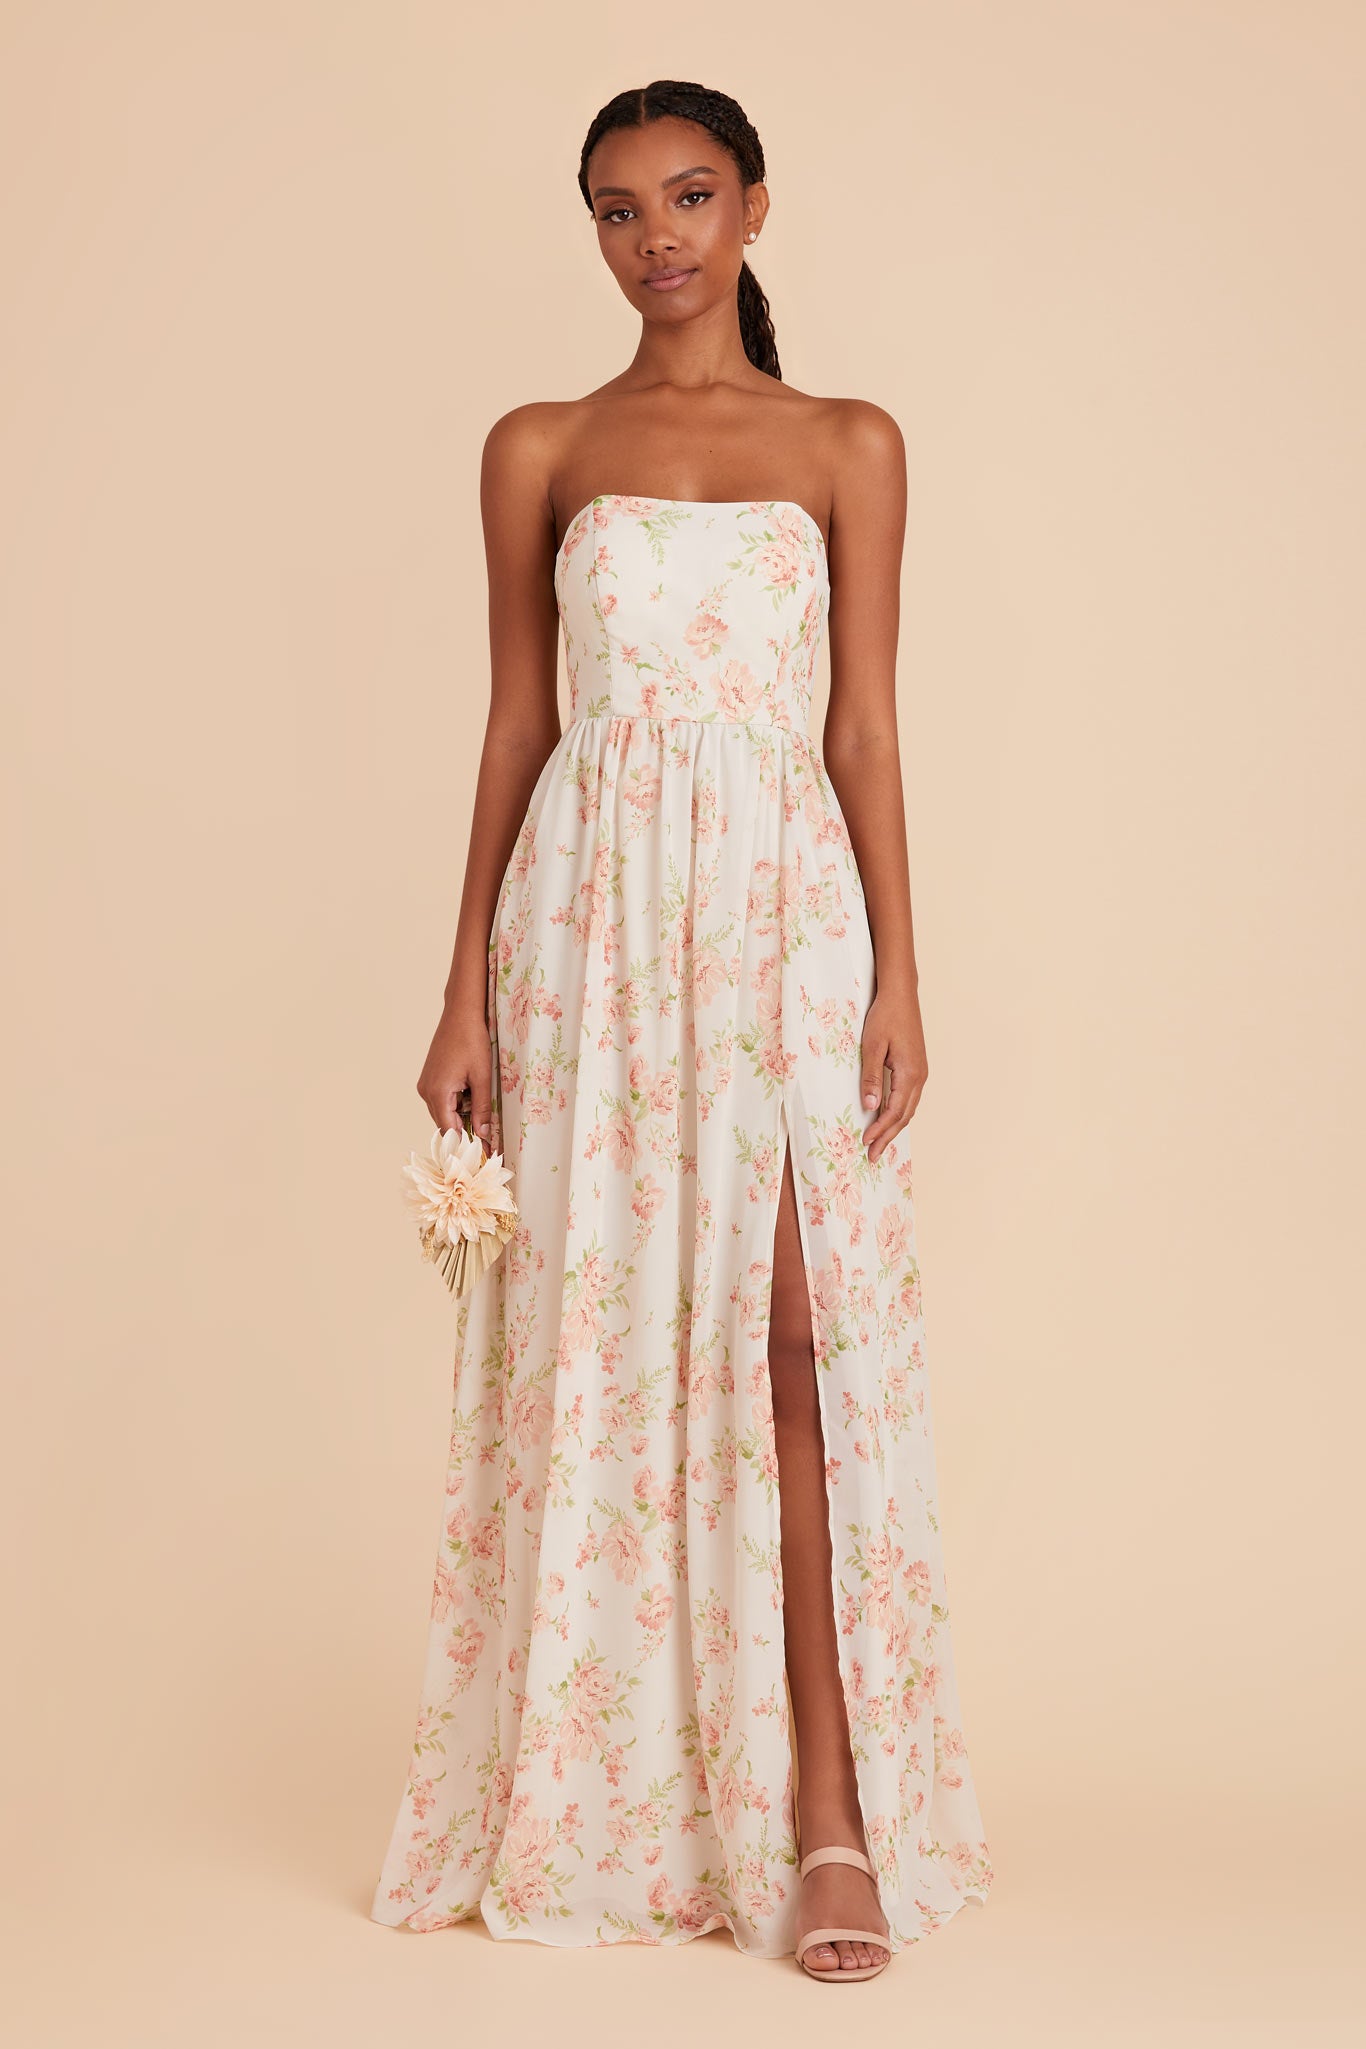 Whimsical Blooms August Convertible Dress by Birdy Grey